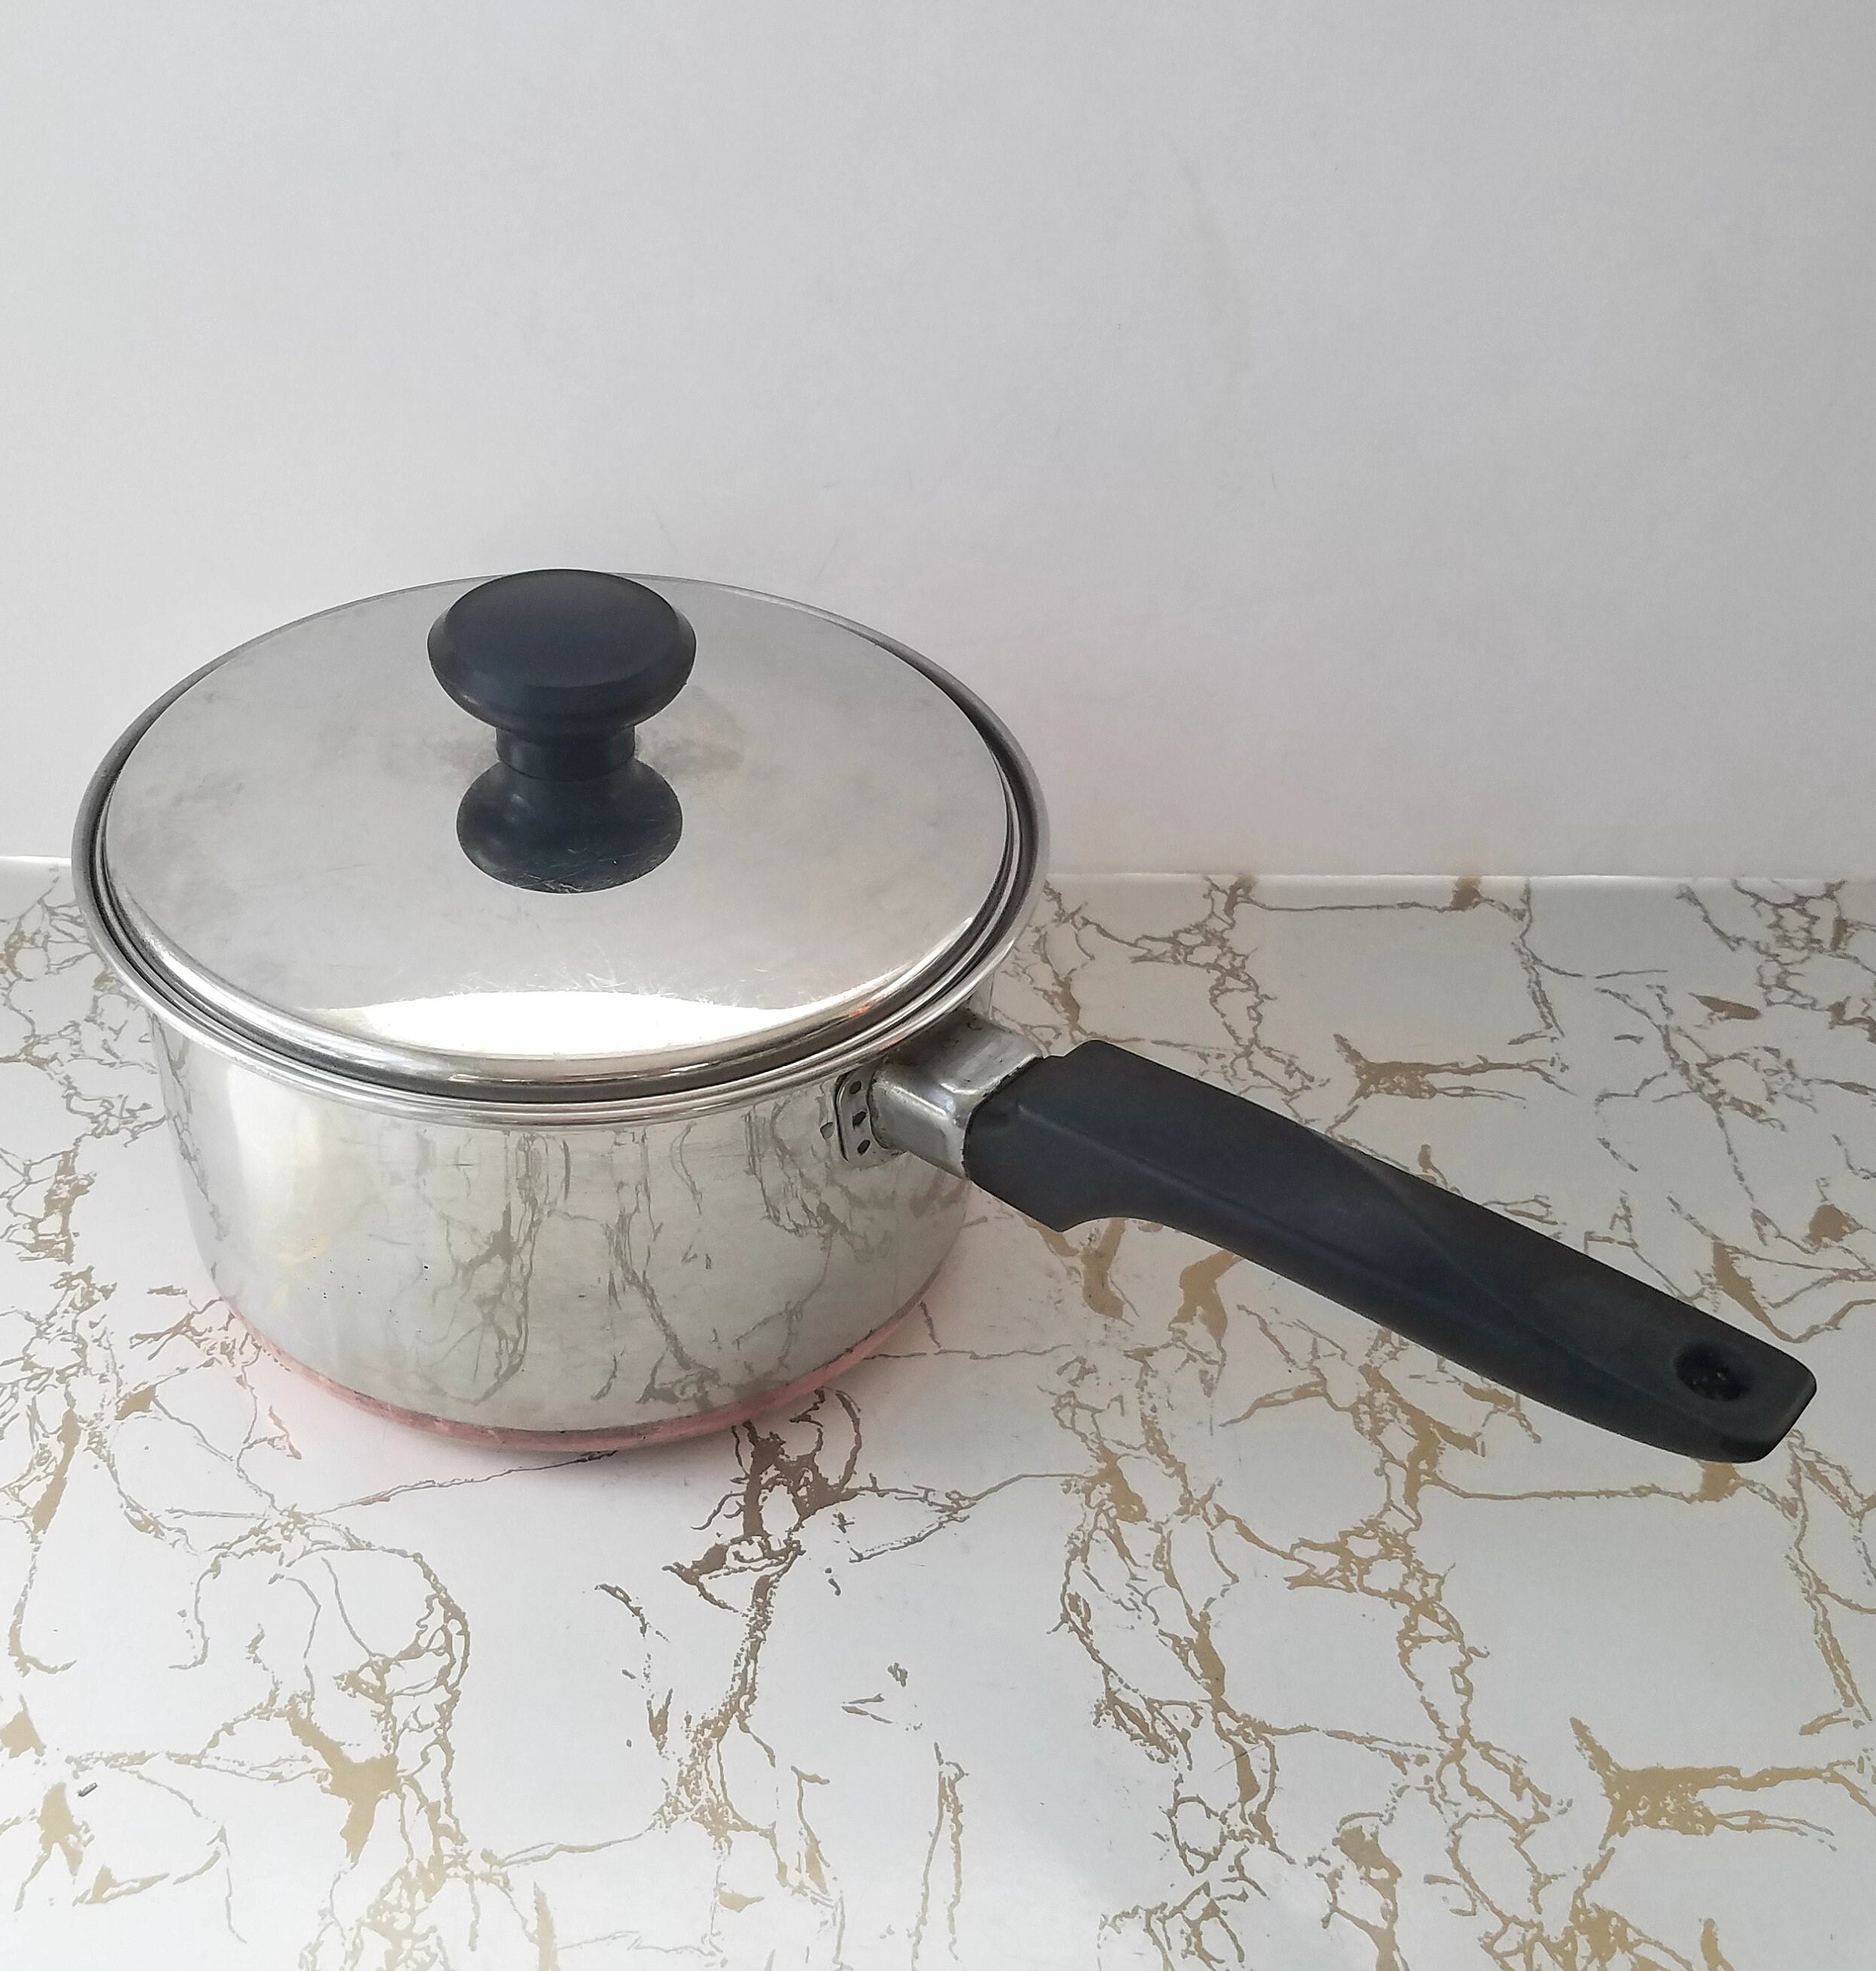 2 Quart Vintage somerset Enamelware Pot With Lid and White Handles Enameled  Pot With Pink Flowers and Blue Ribbon 